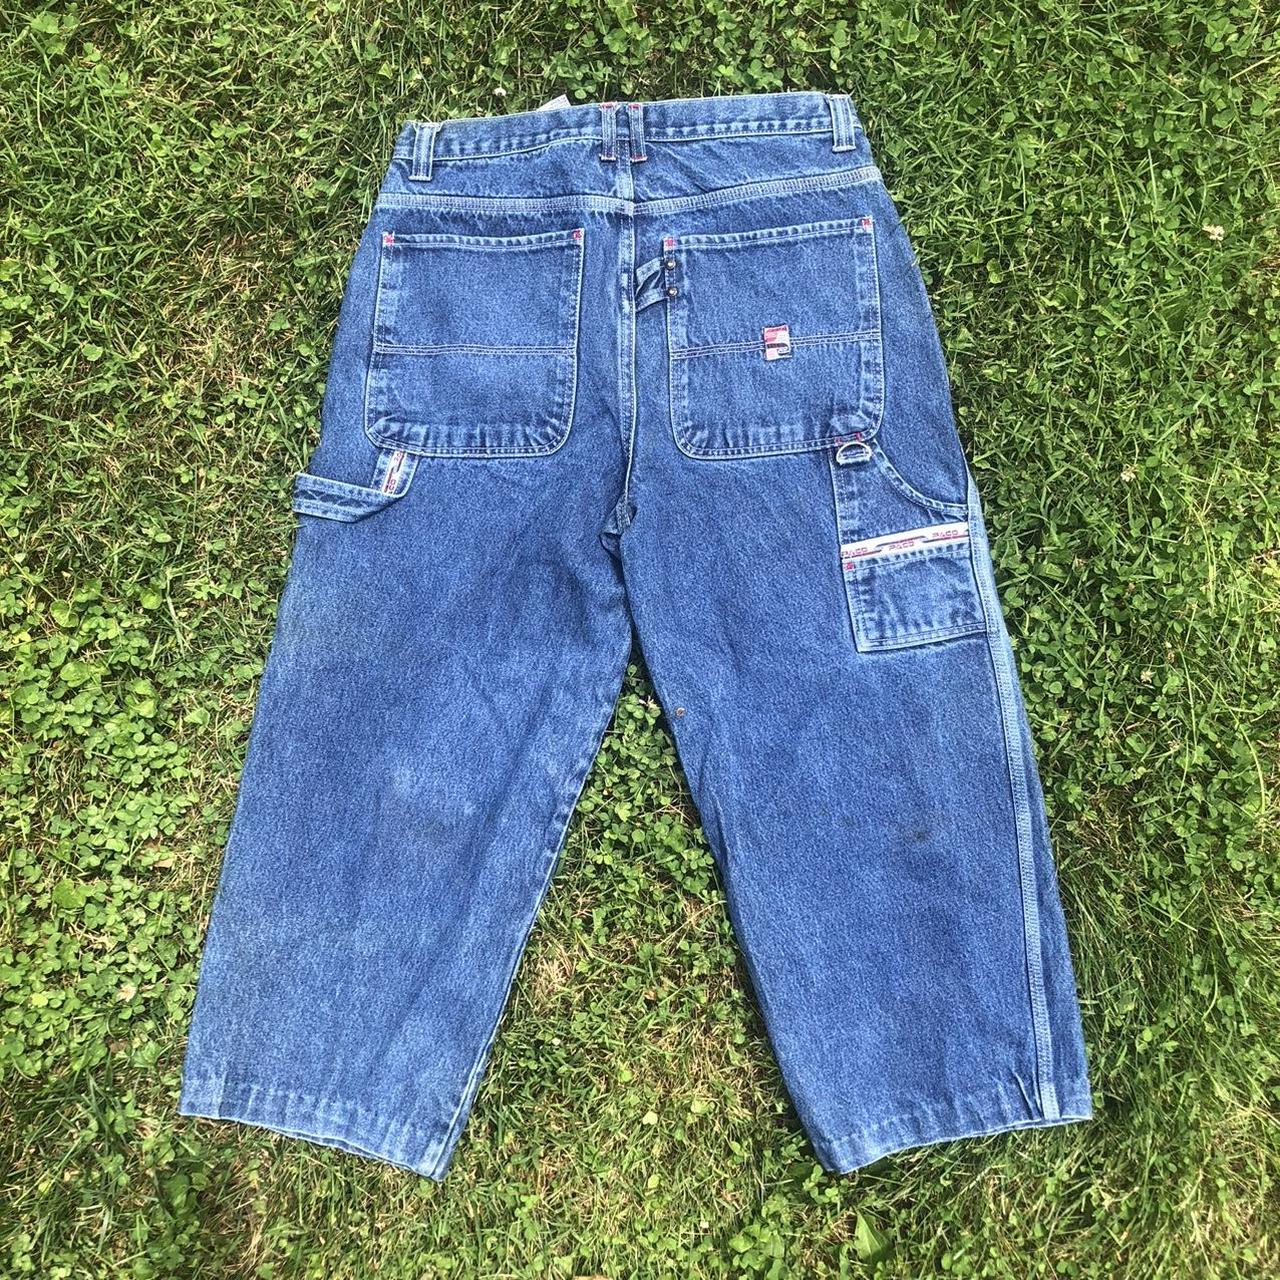 Paco jeans y2k jnco style baggy jeans short... - Depop